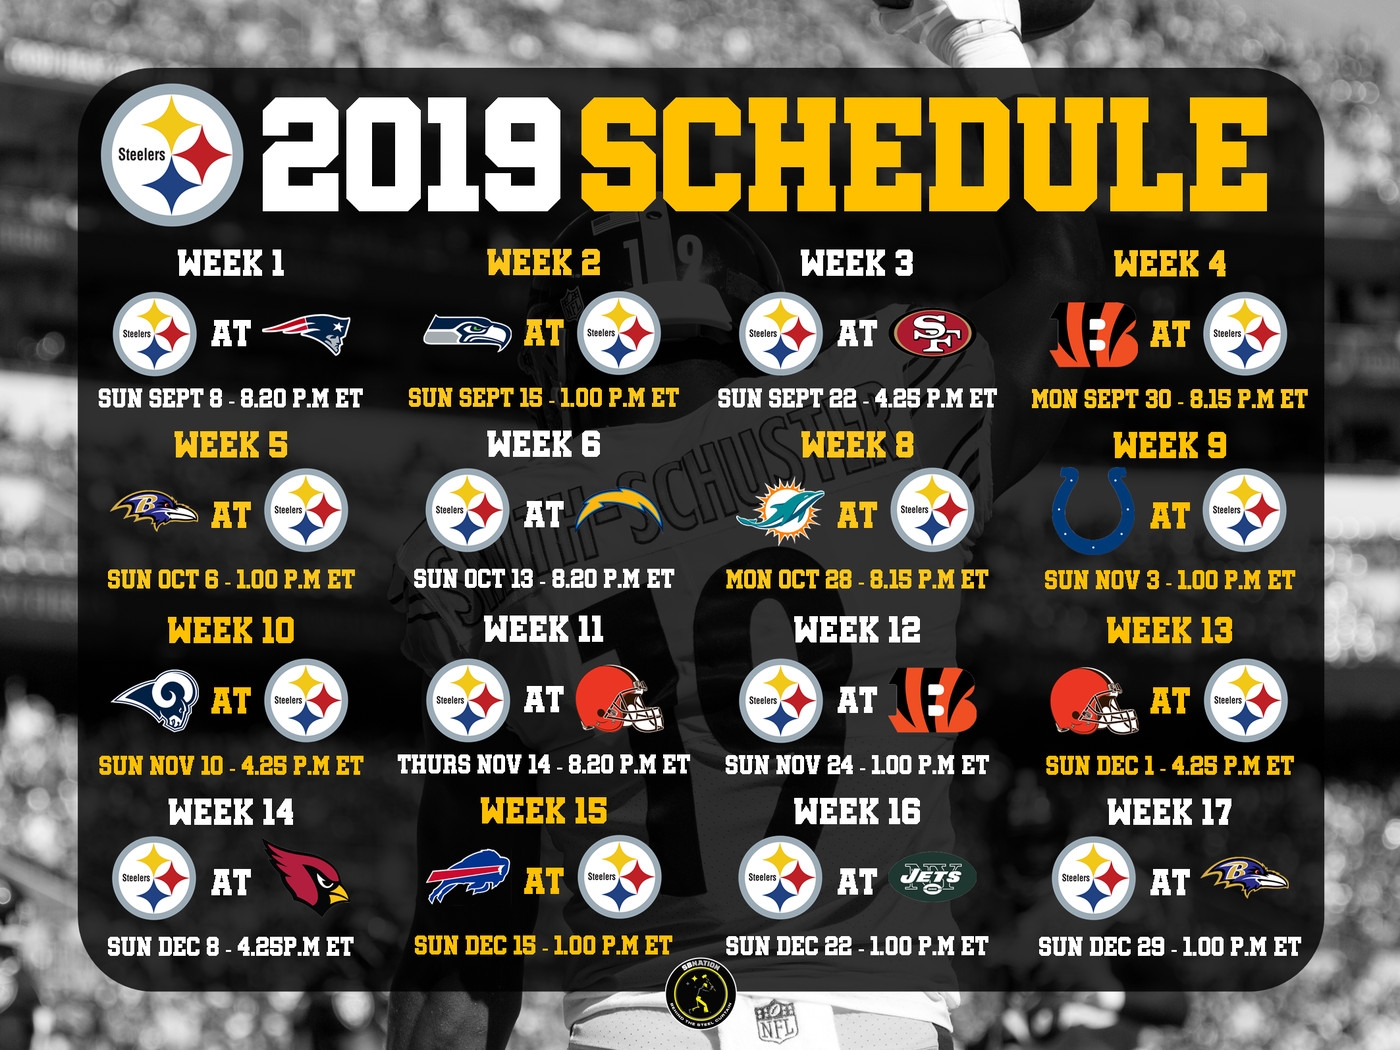 Pittsburgh Steelers 2019 Schedule: Rumors, Leaks And Nfl Updates pertaining to 2019-2020 Nfl Schedule